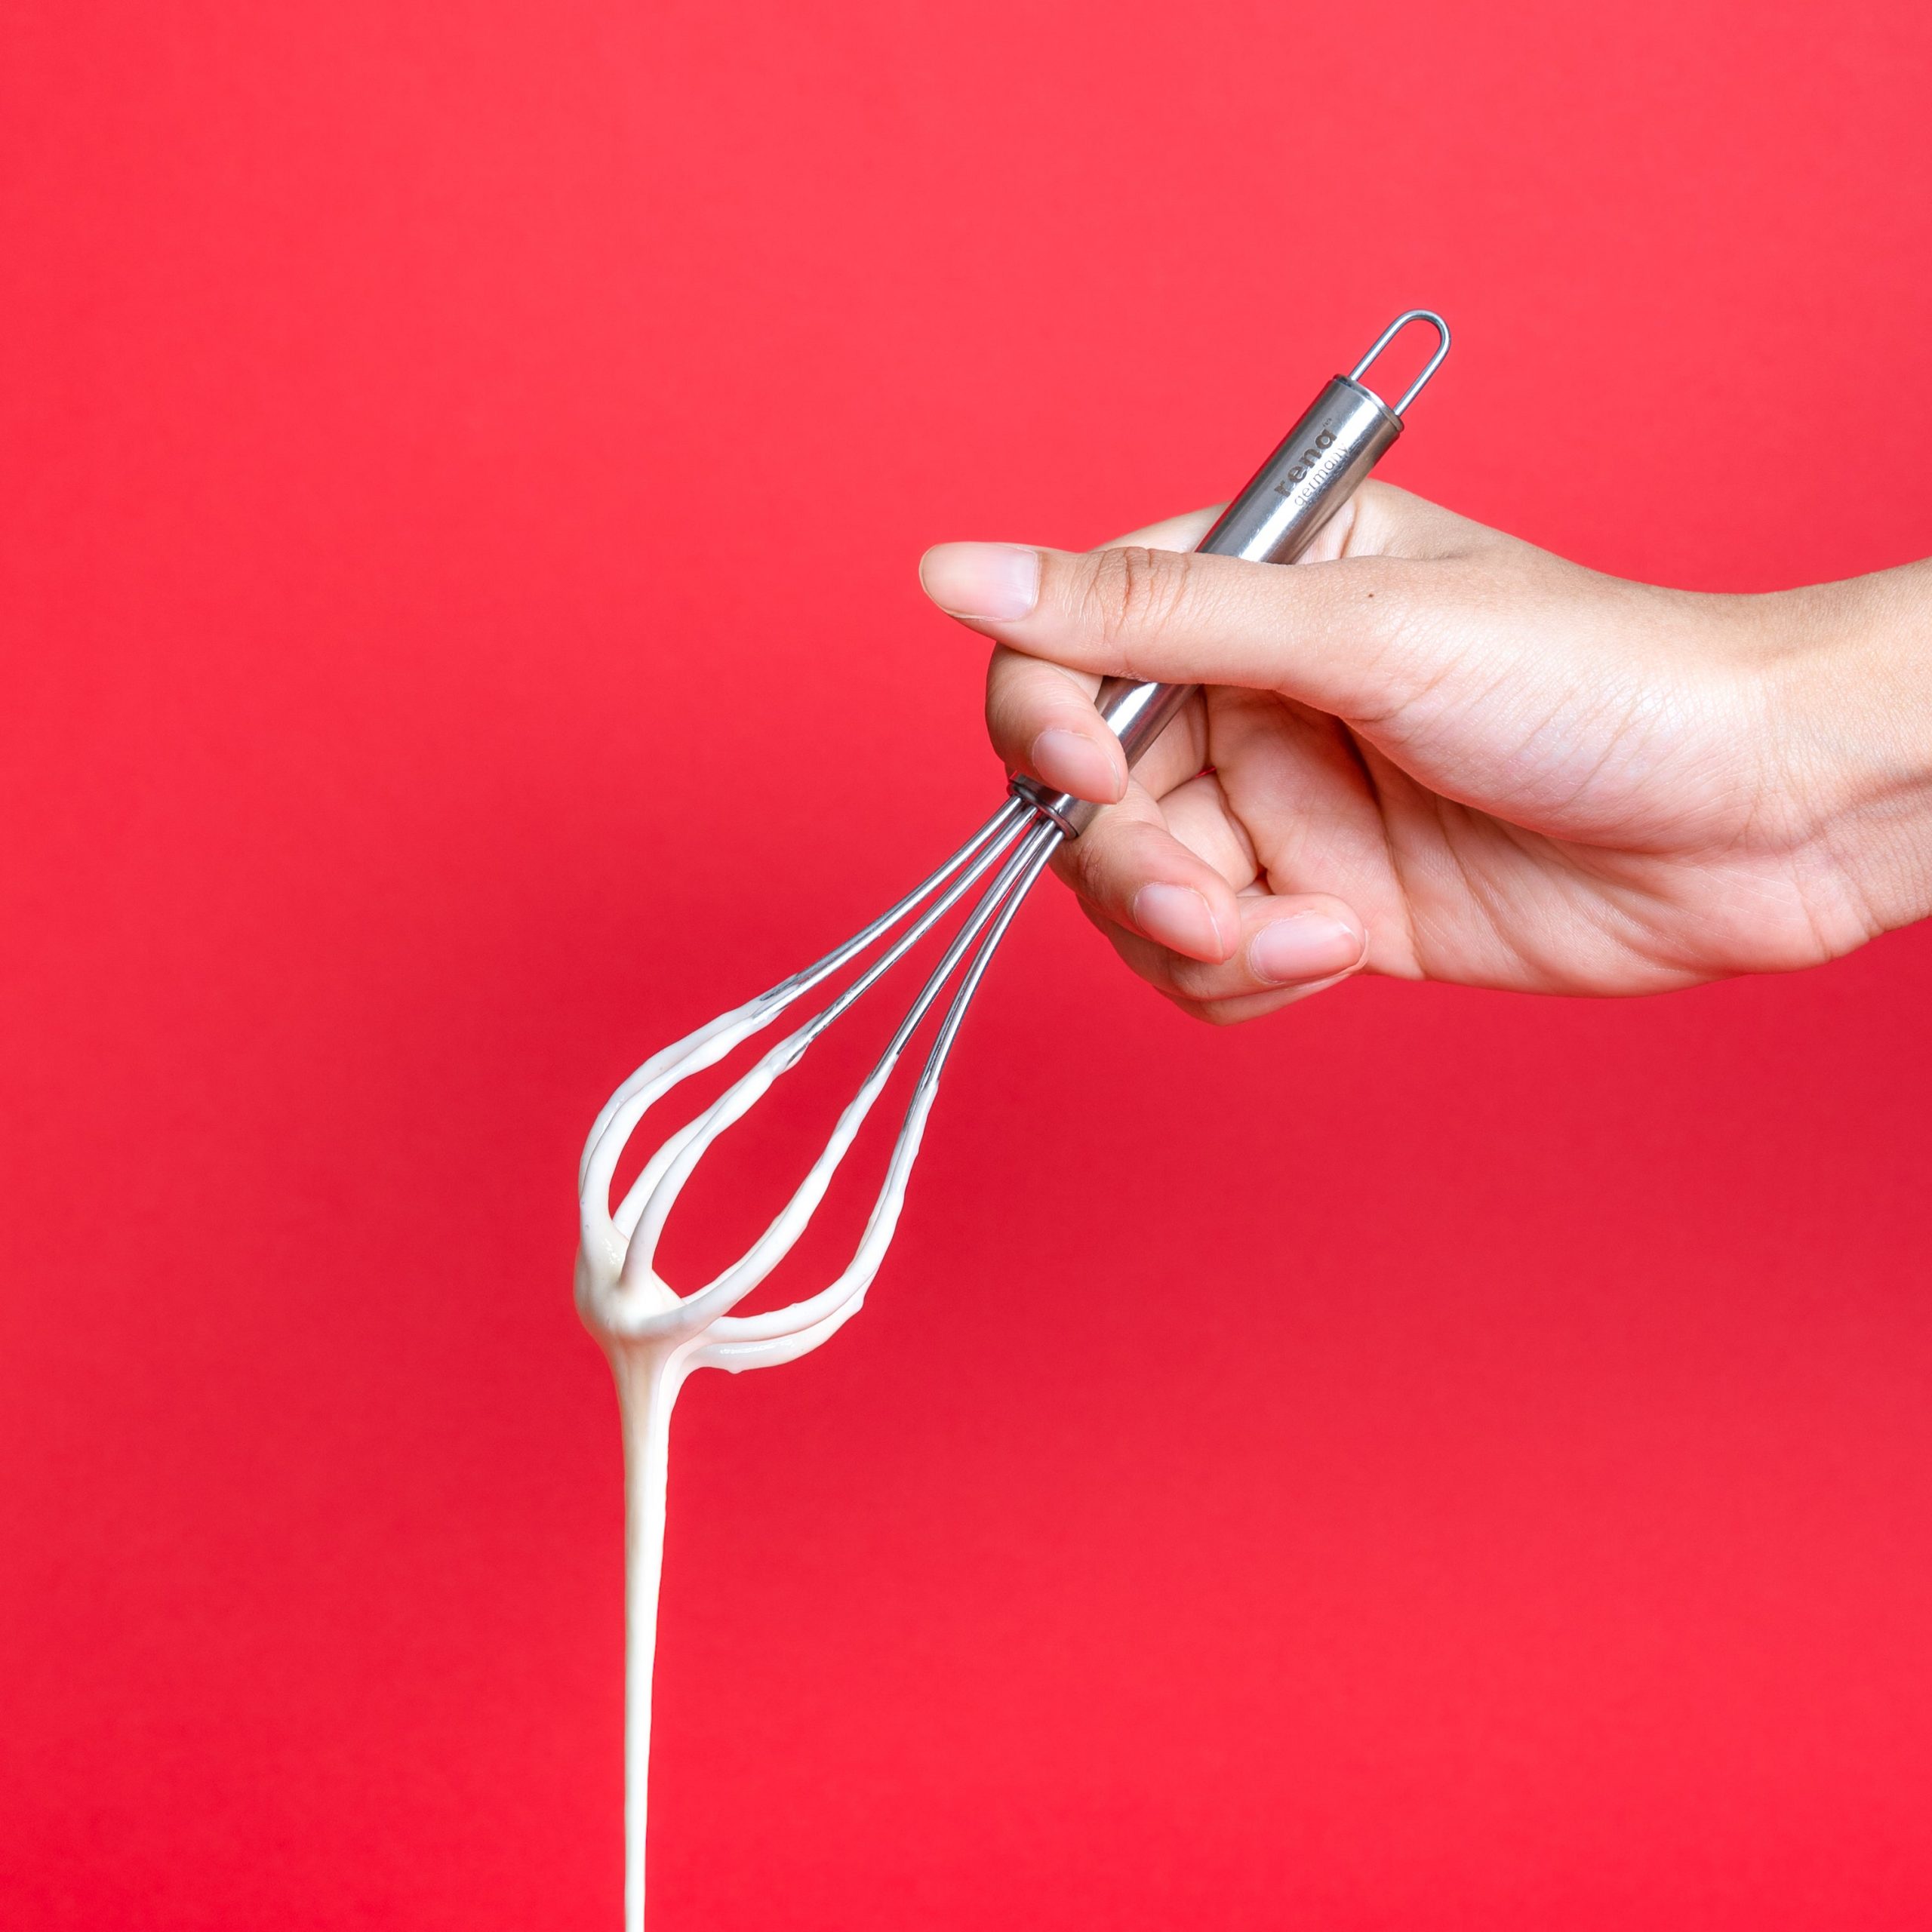 Shop Rena Germany Hand Whisk Online - All About Baking